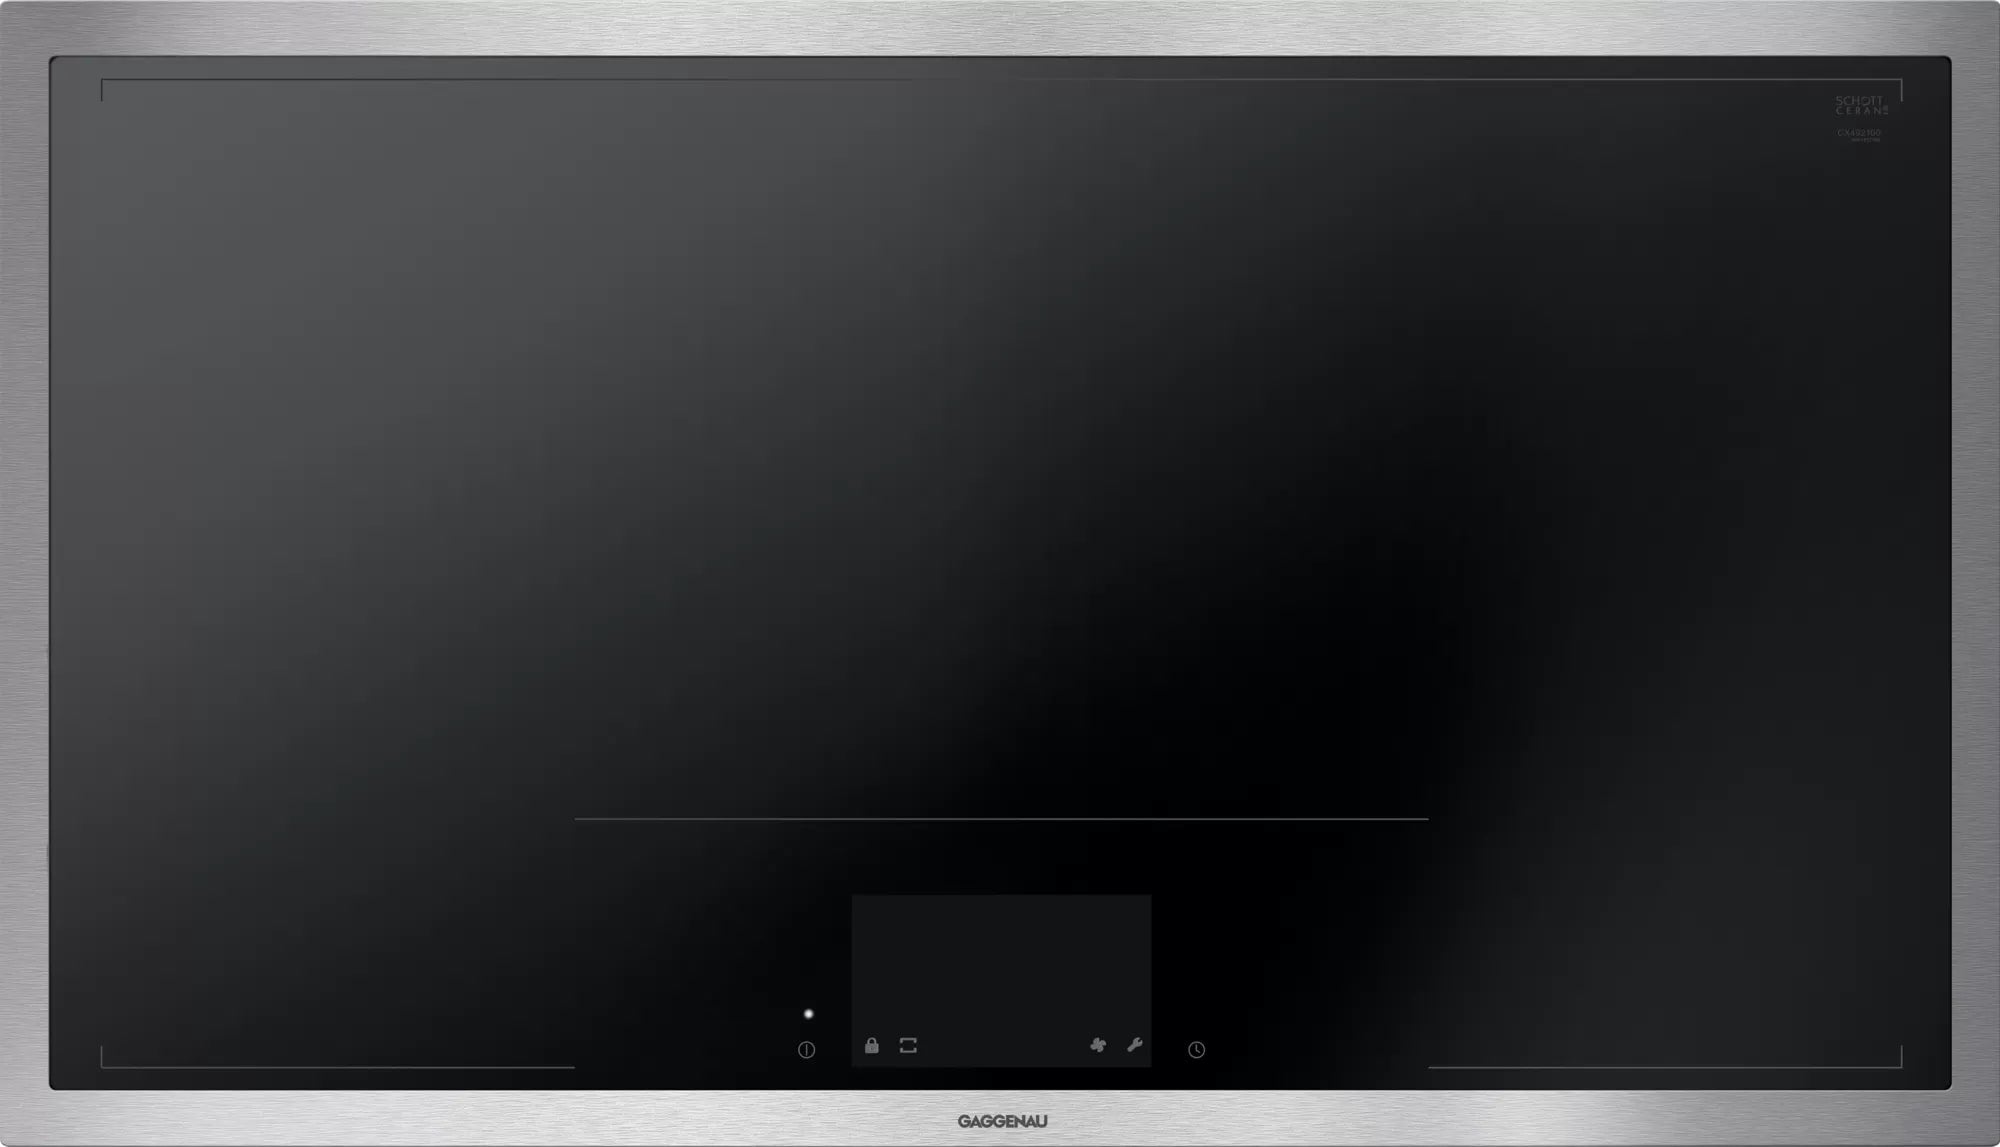 Gaggenau - 35.75 inch wide Induction Cooktop in Stainless - CX492611